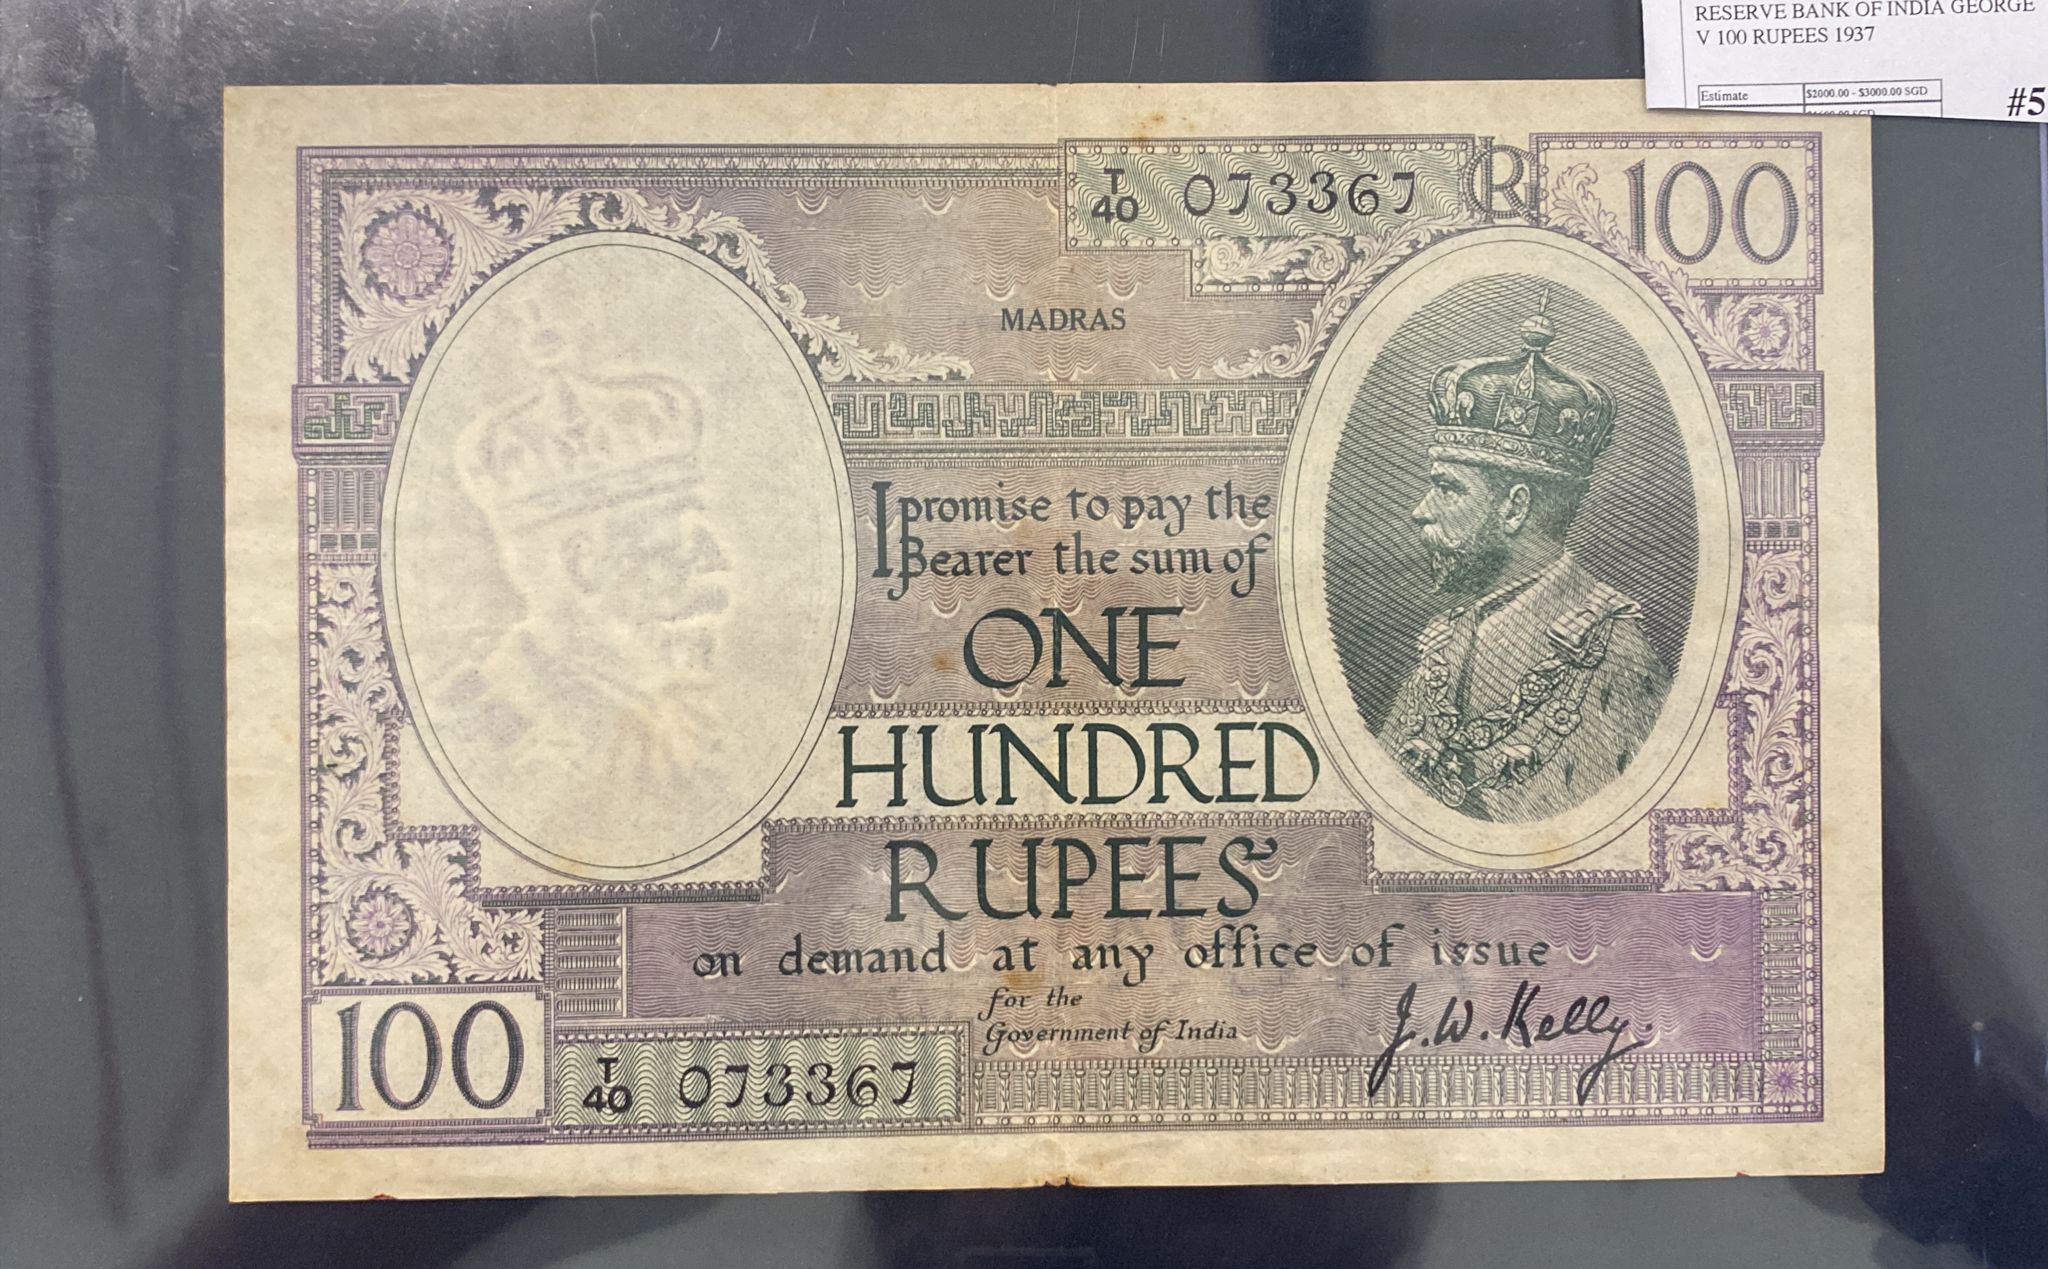 GOVERNMENT OF INDIA GEORGE V 100 RUPEES MADRAS - Image 3 of 4